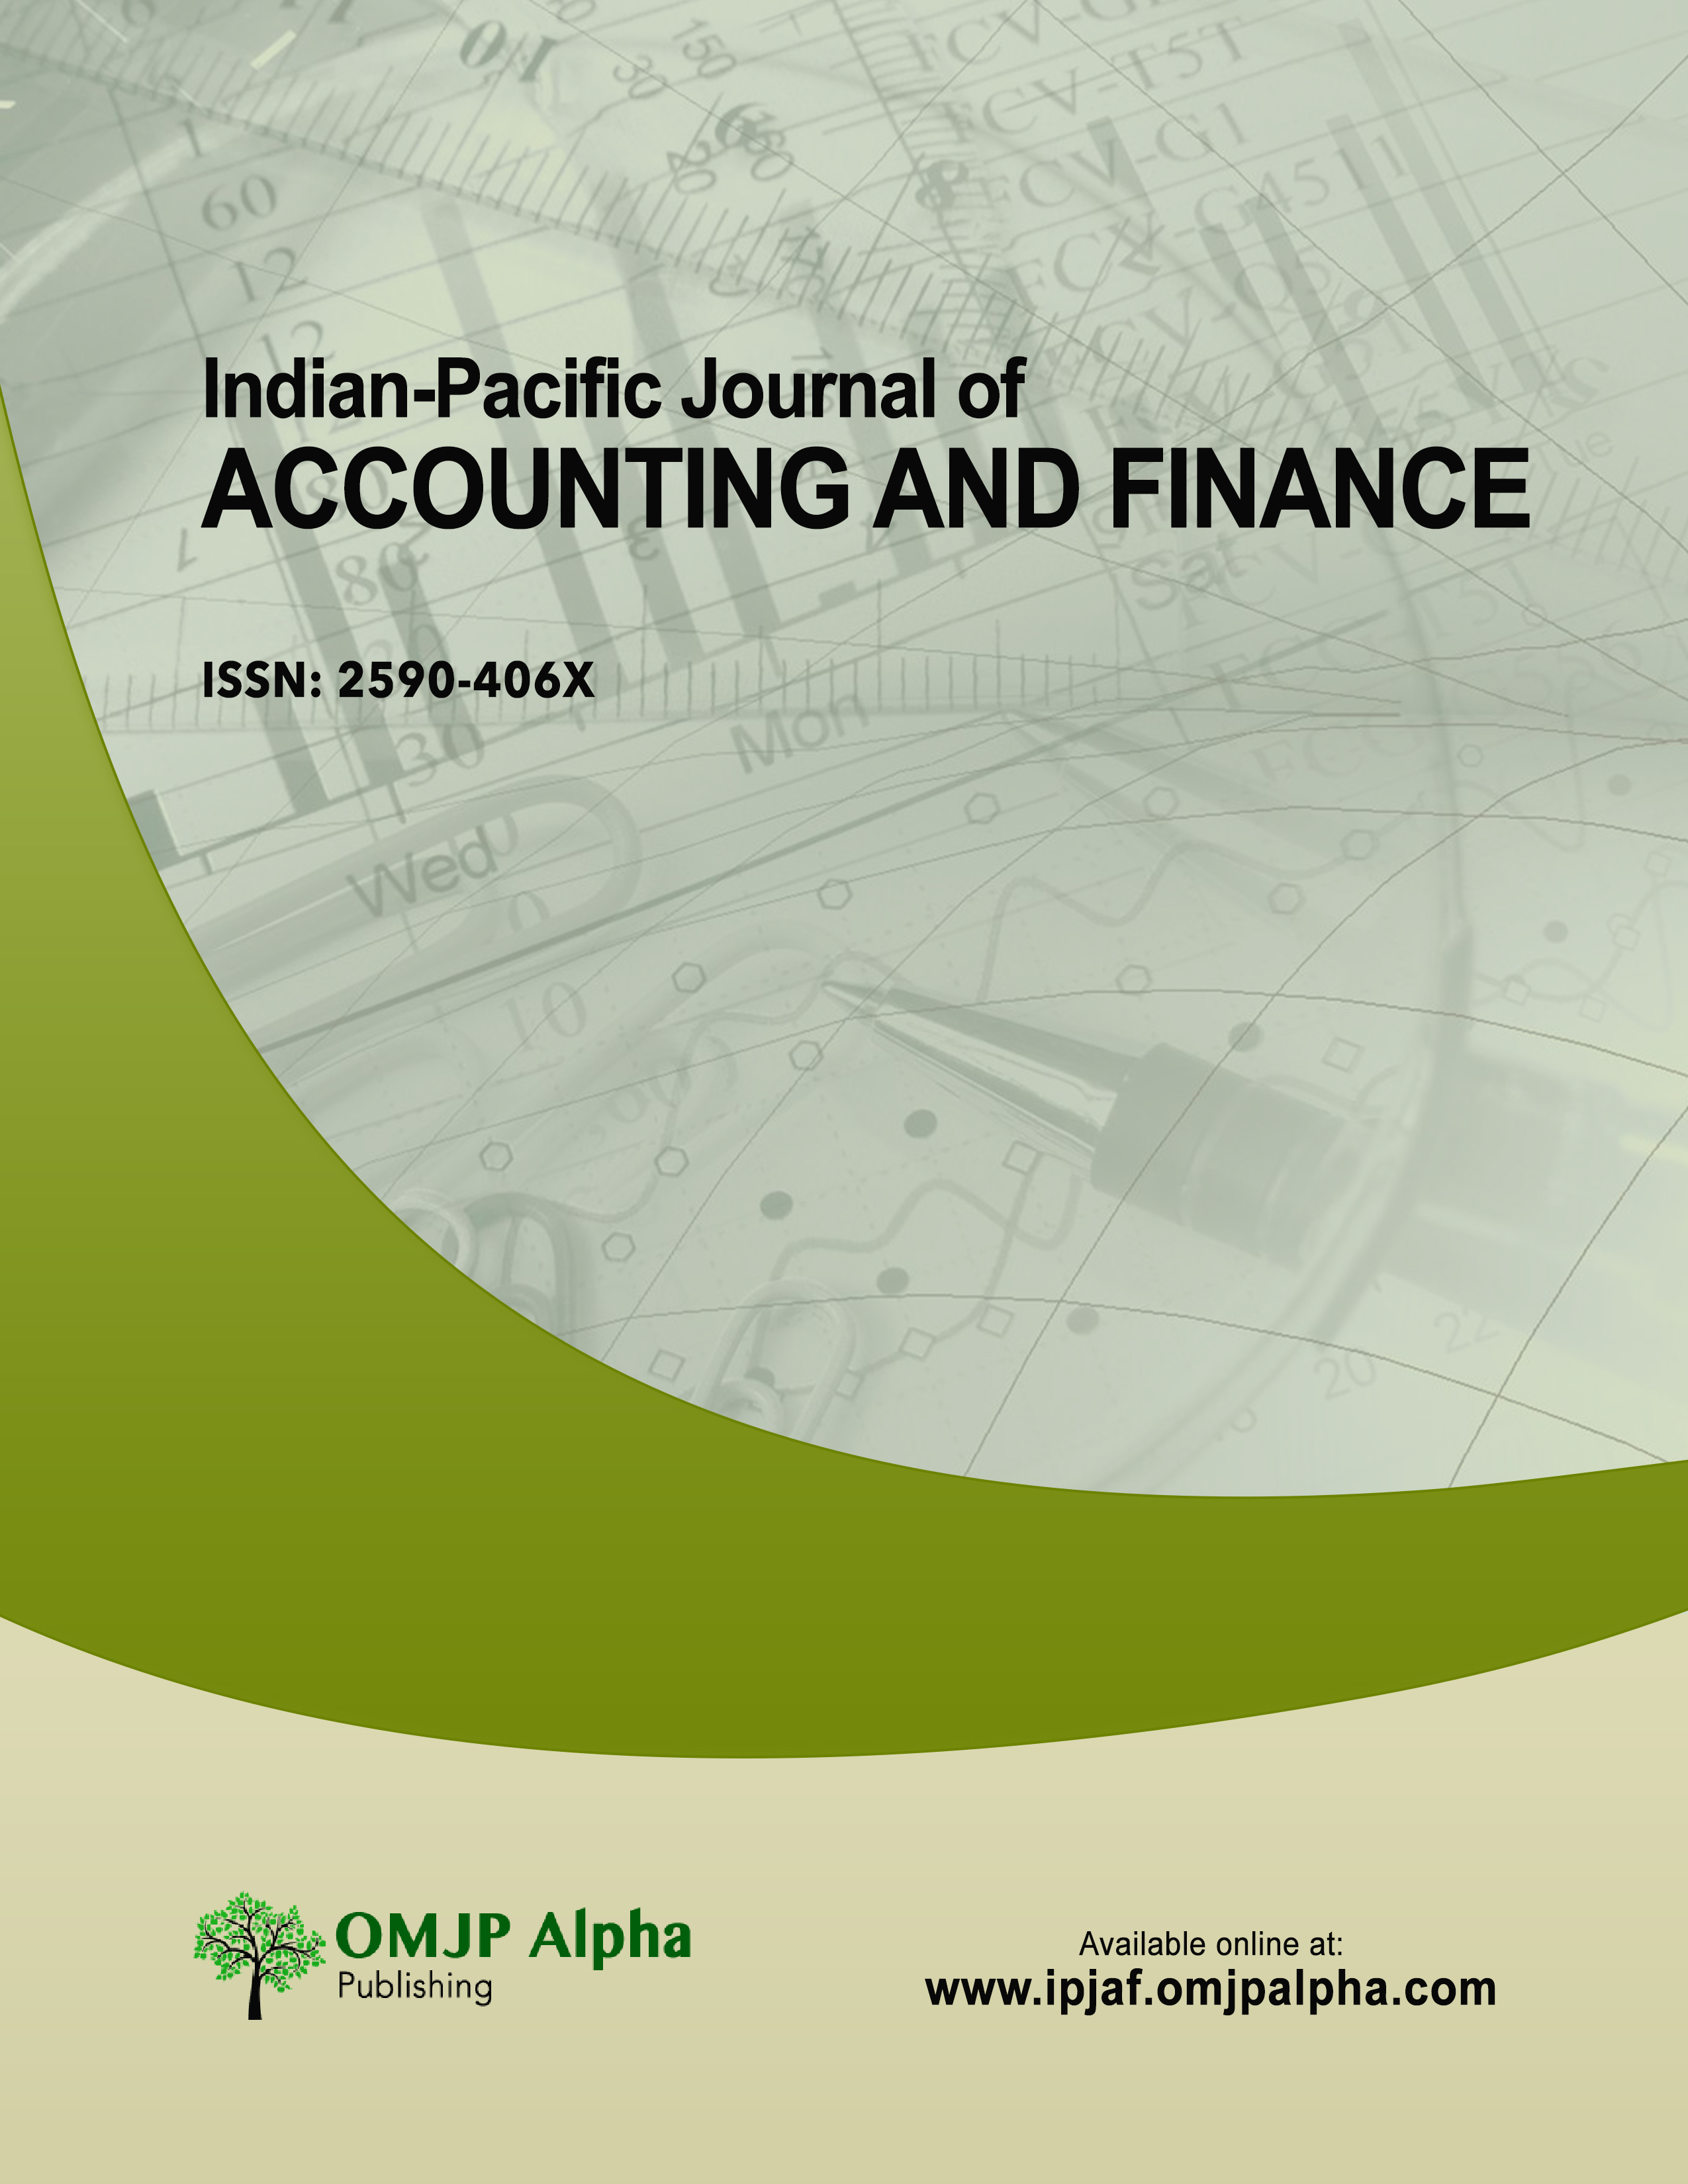 Indian-Pacific Journal of Accounting and Finance